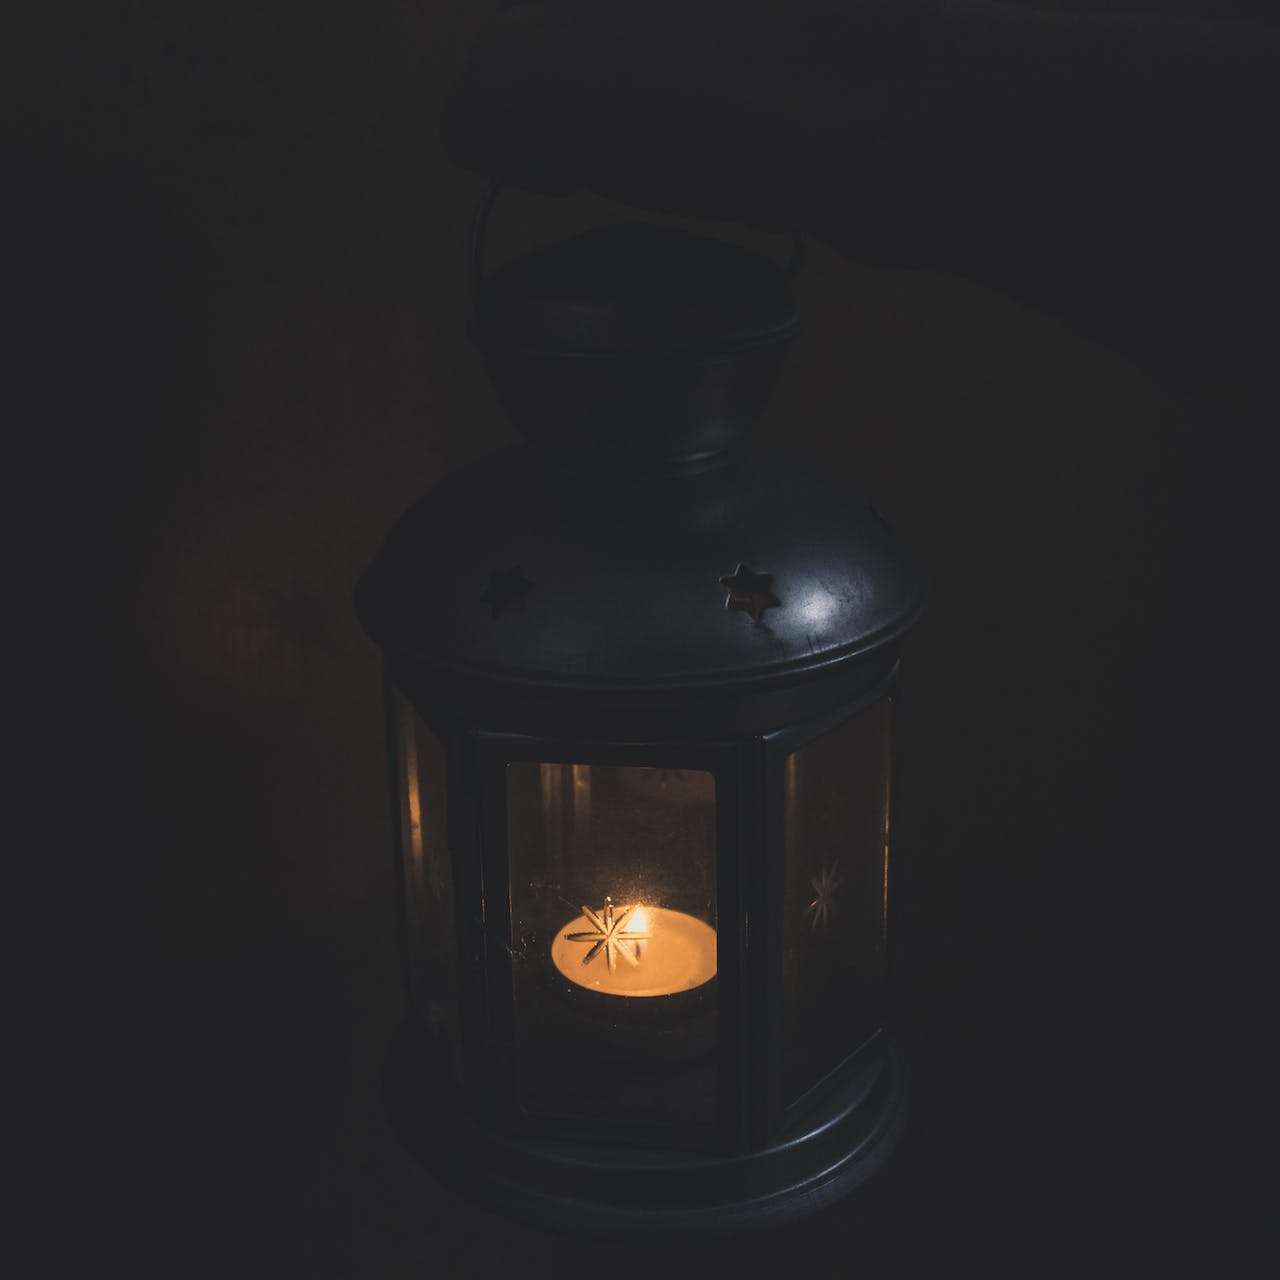 photo of a candle in a lantern